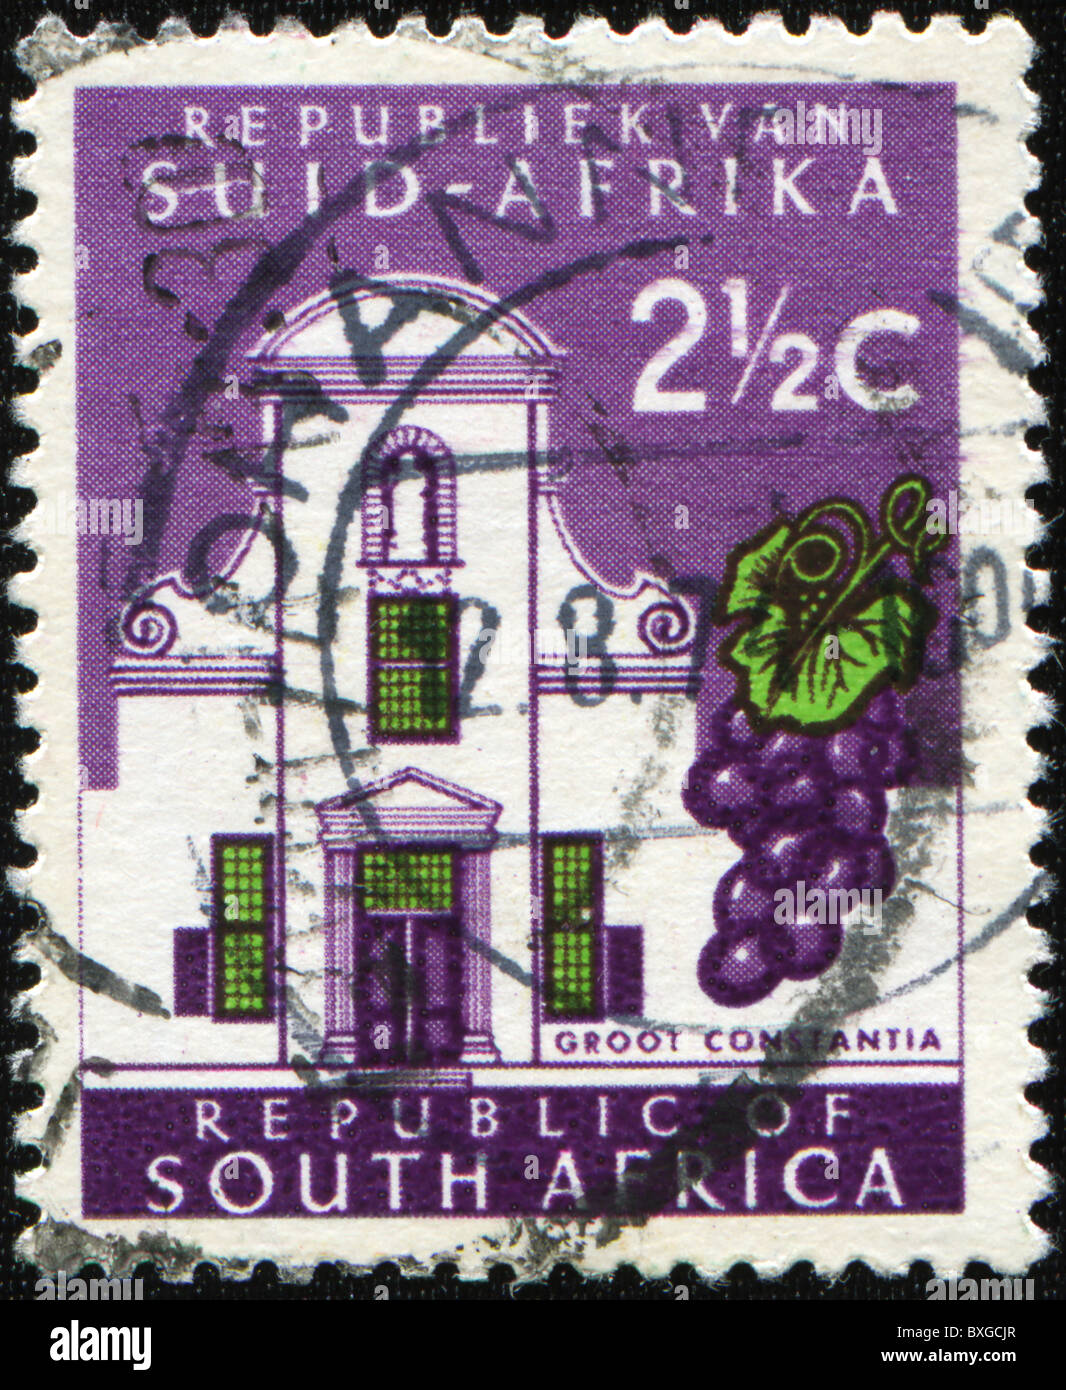 SOUTH AFRICA - CIRCA 1961: A stamp printed in South Africa shows Cape Towns Groot Constantia wine estate, circa 1961 Stock Photo